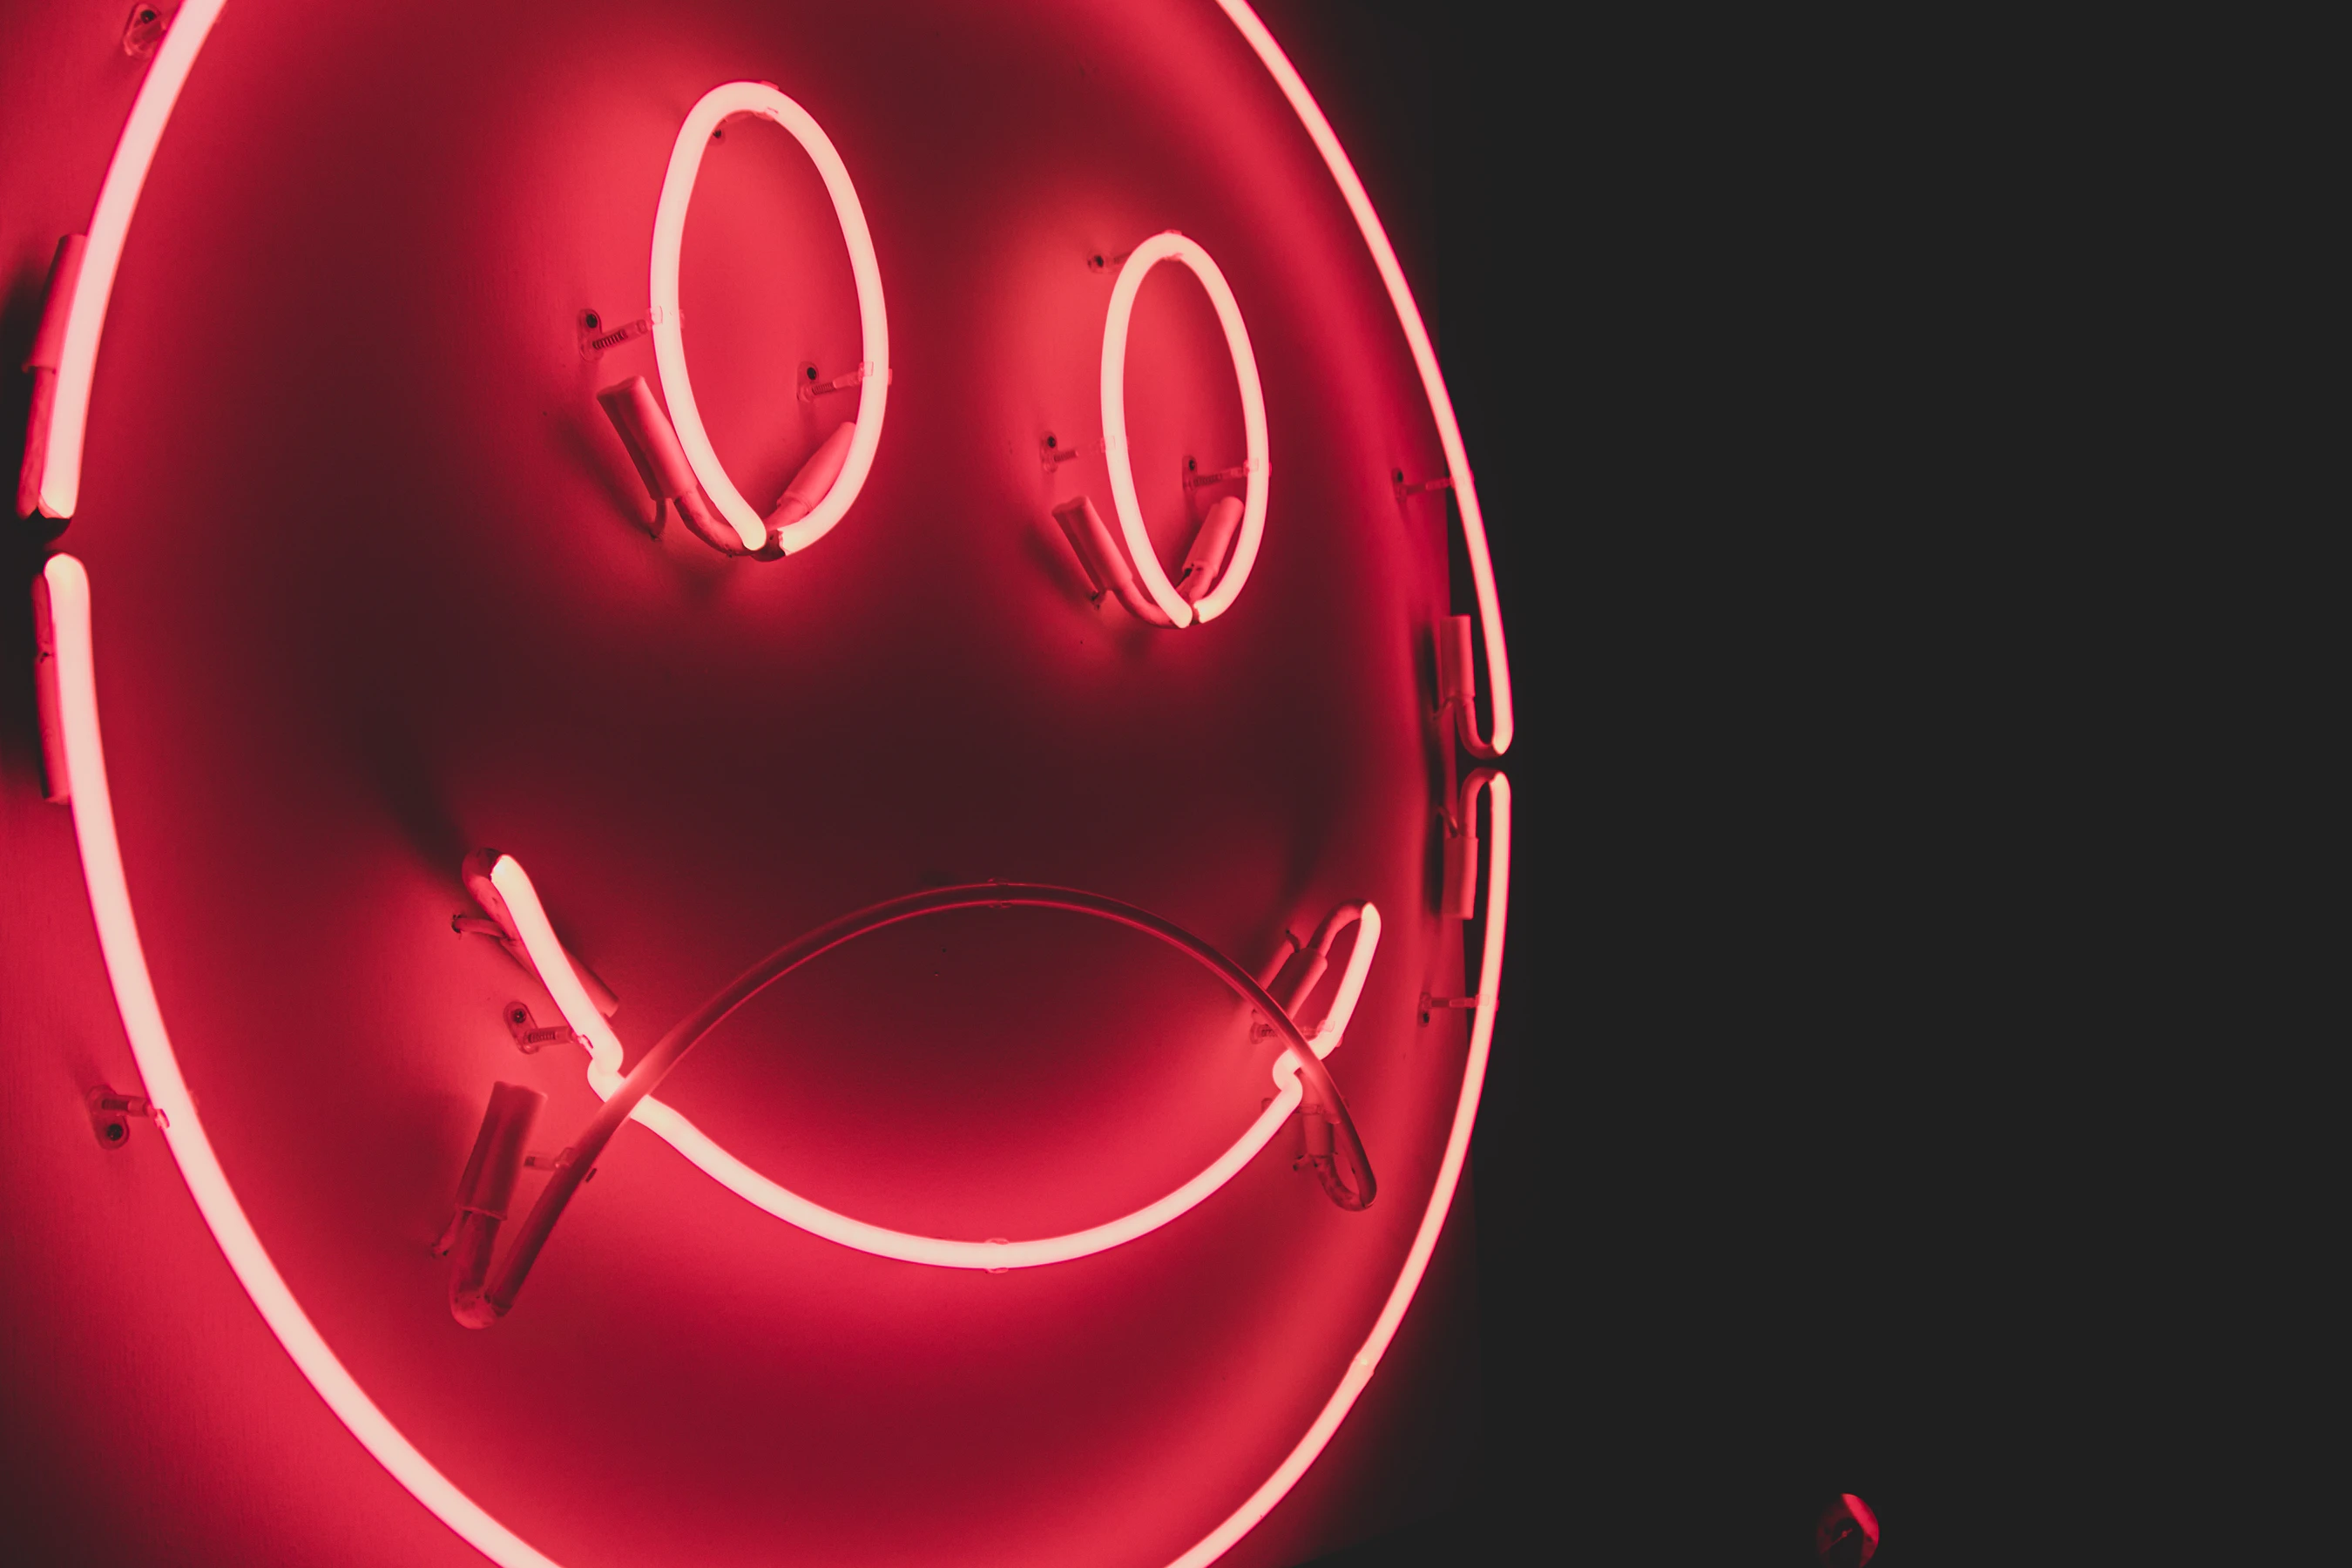 Neon pink smiley face